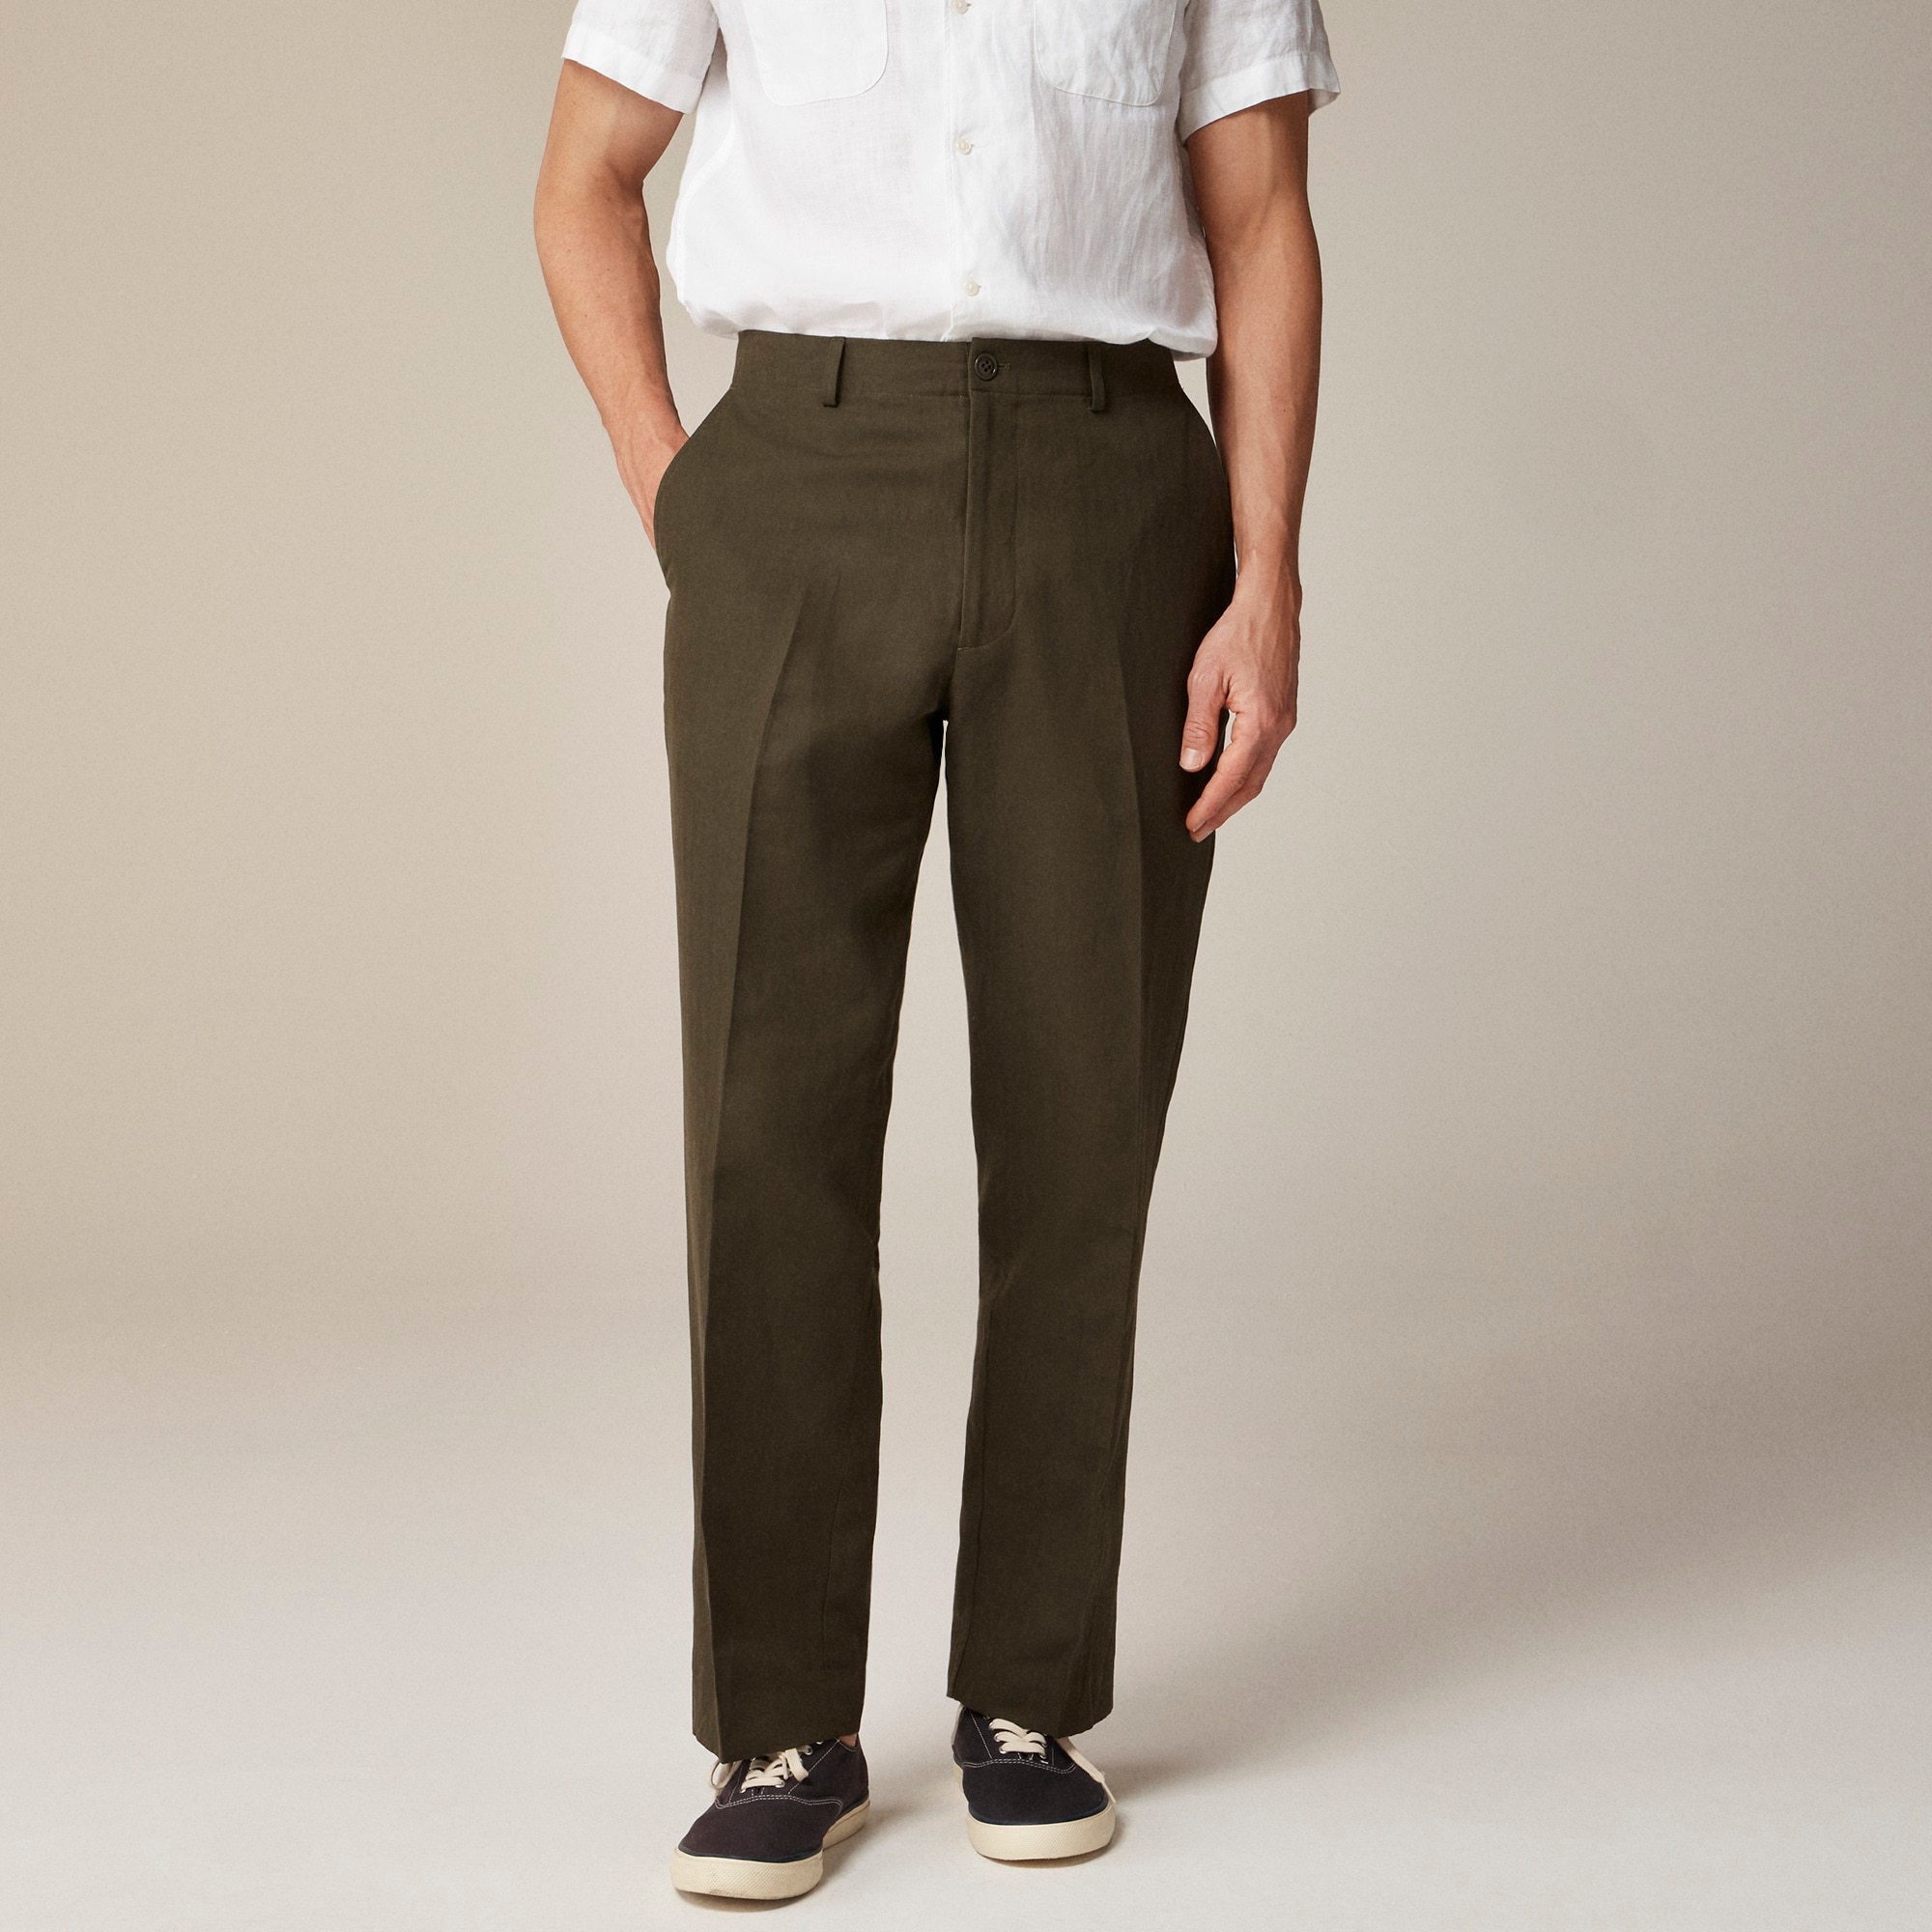 j.crew: kenmare relaxed-fit suit pant in cotton-linen blend herringbone for men